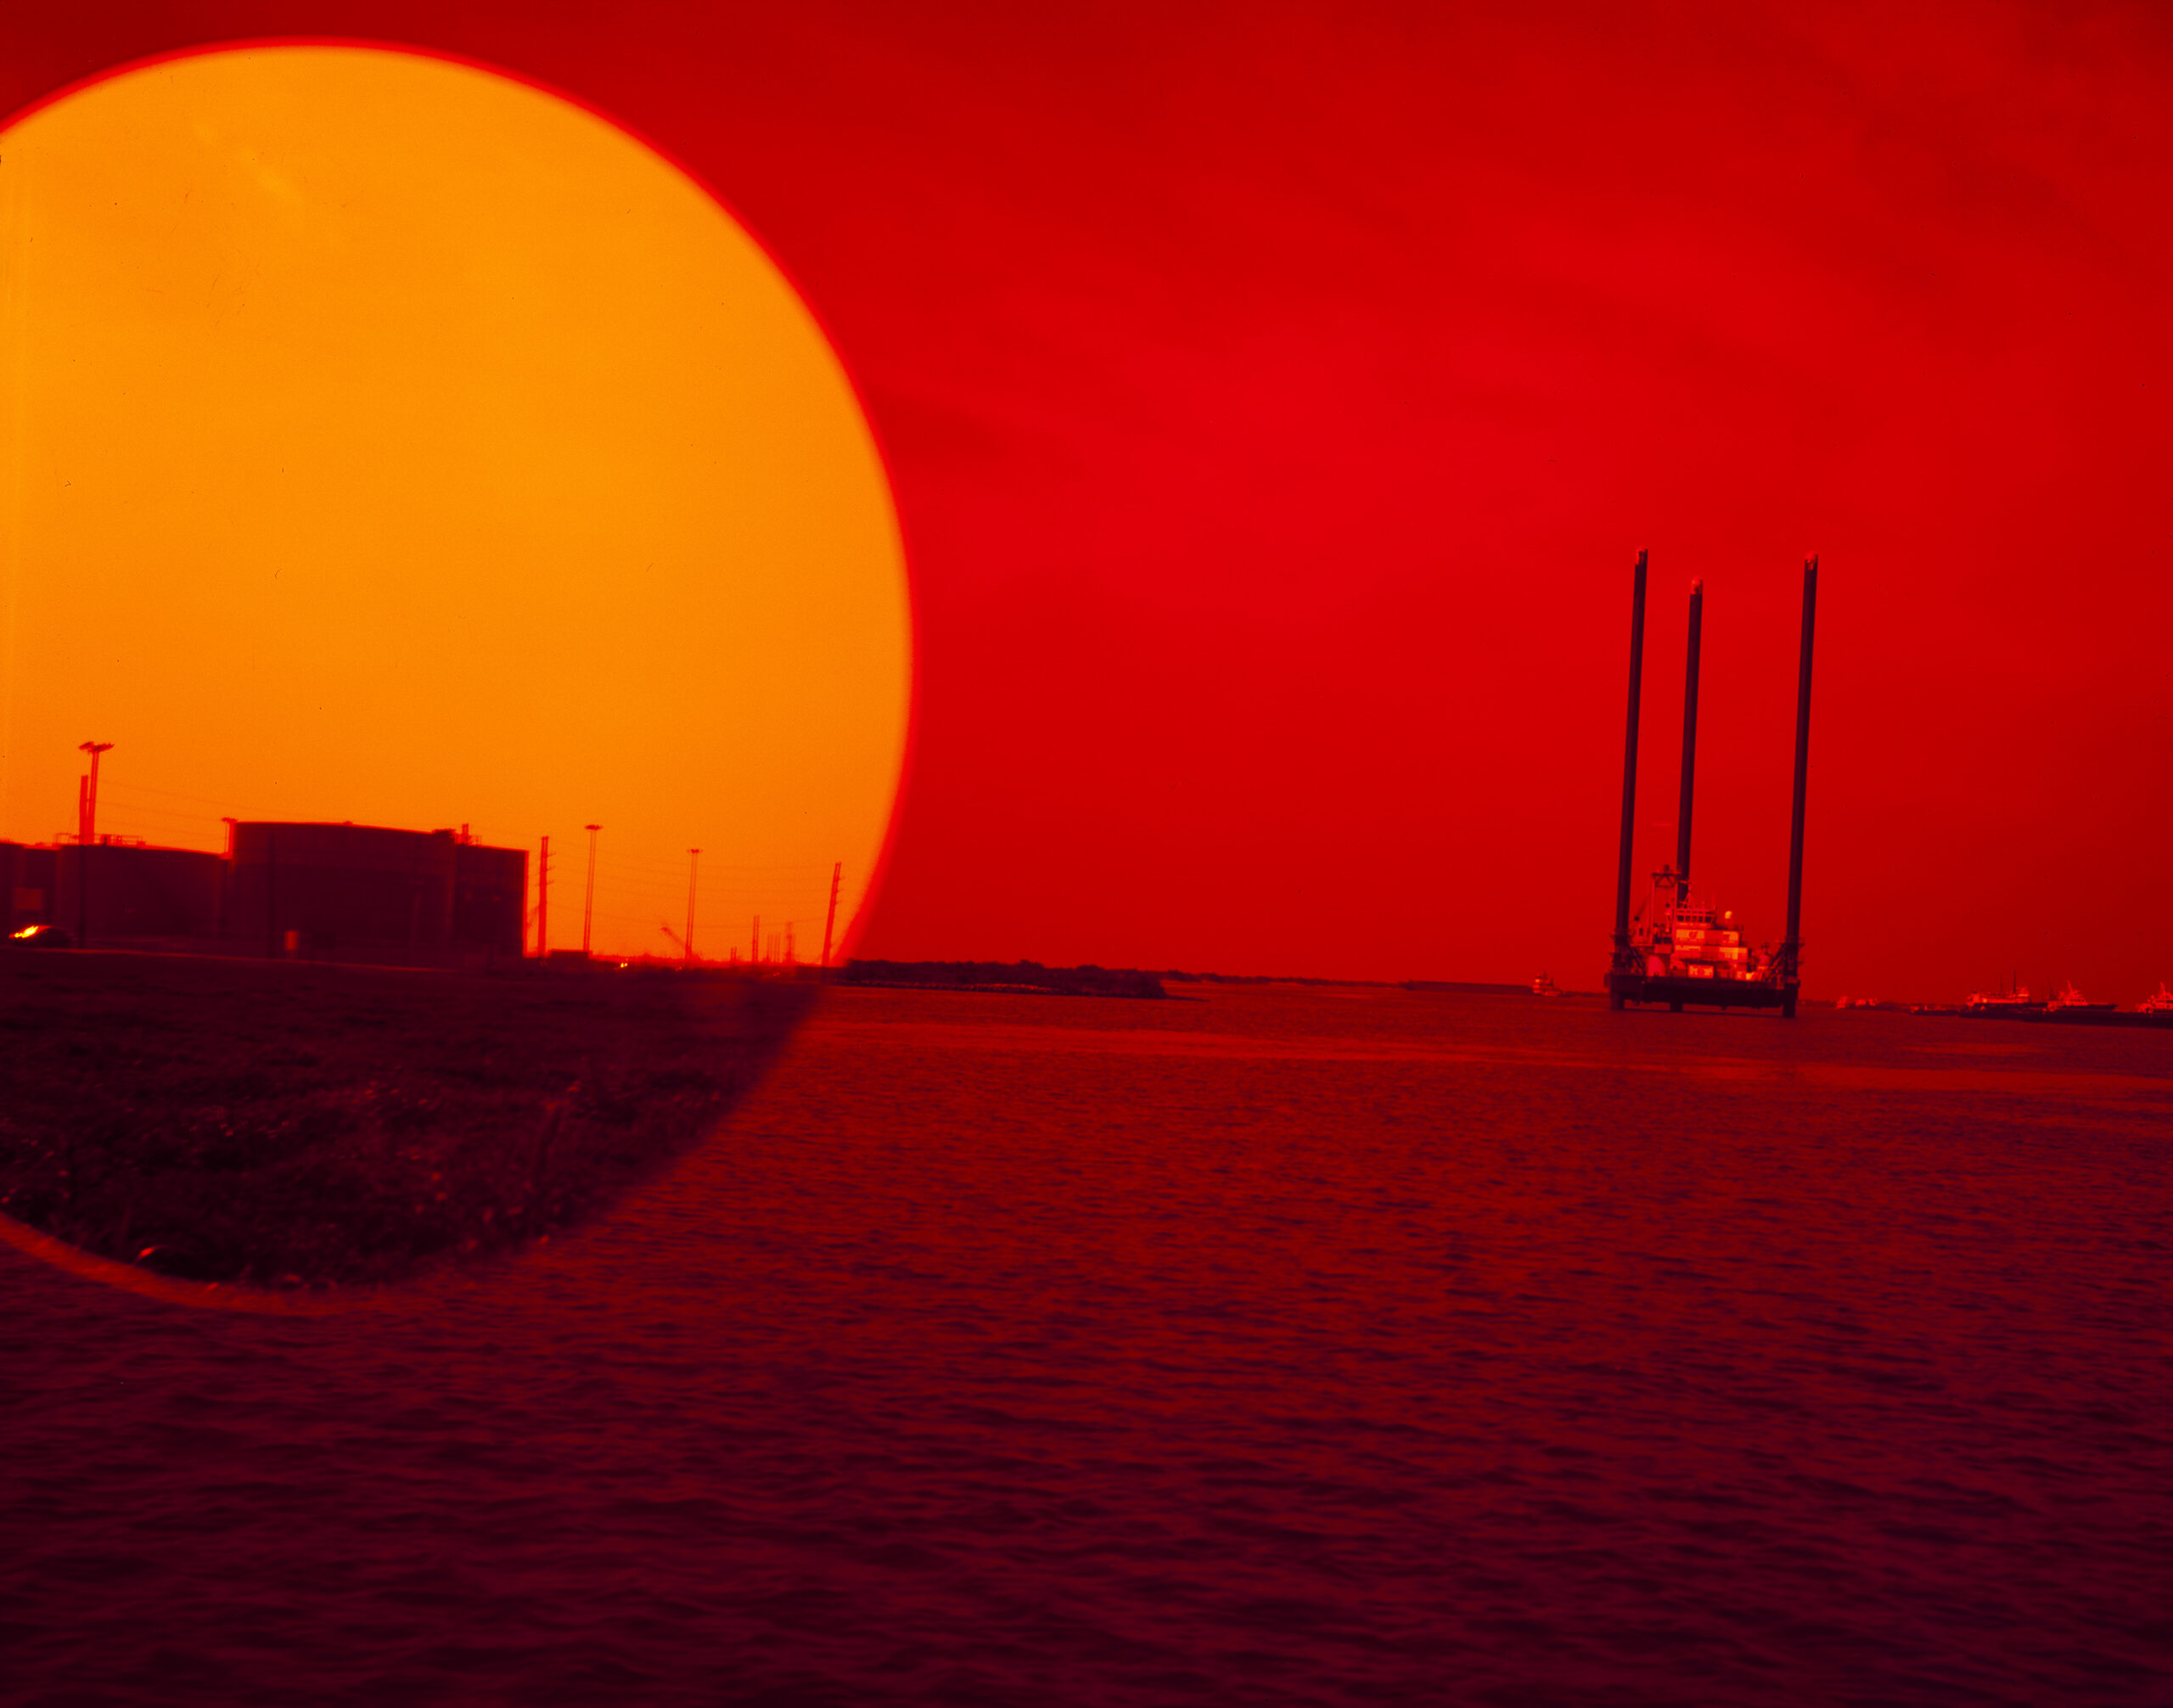 Photograph of a red sky and sea with boats at a distance. A large yellow circle on the top left resembles a sun setting over the ocean. Inside the circle, there is an image of a land mass with industrial buildings.